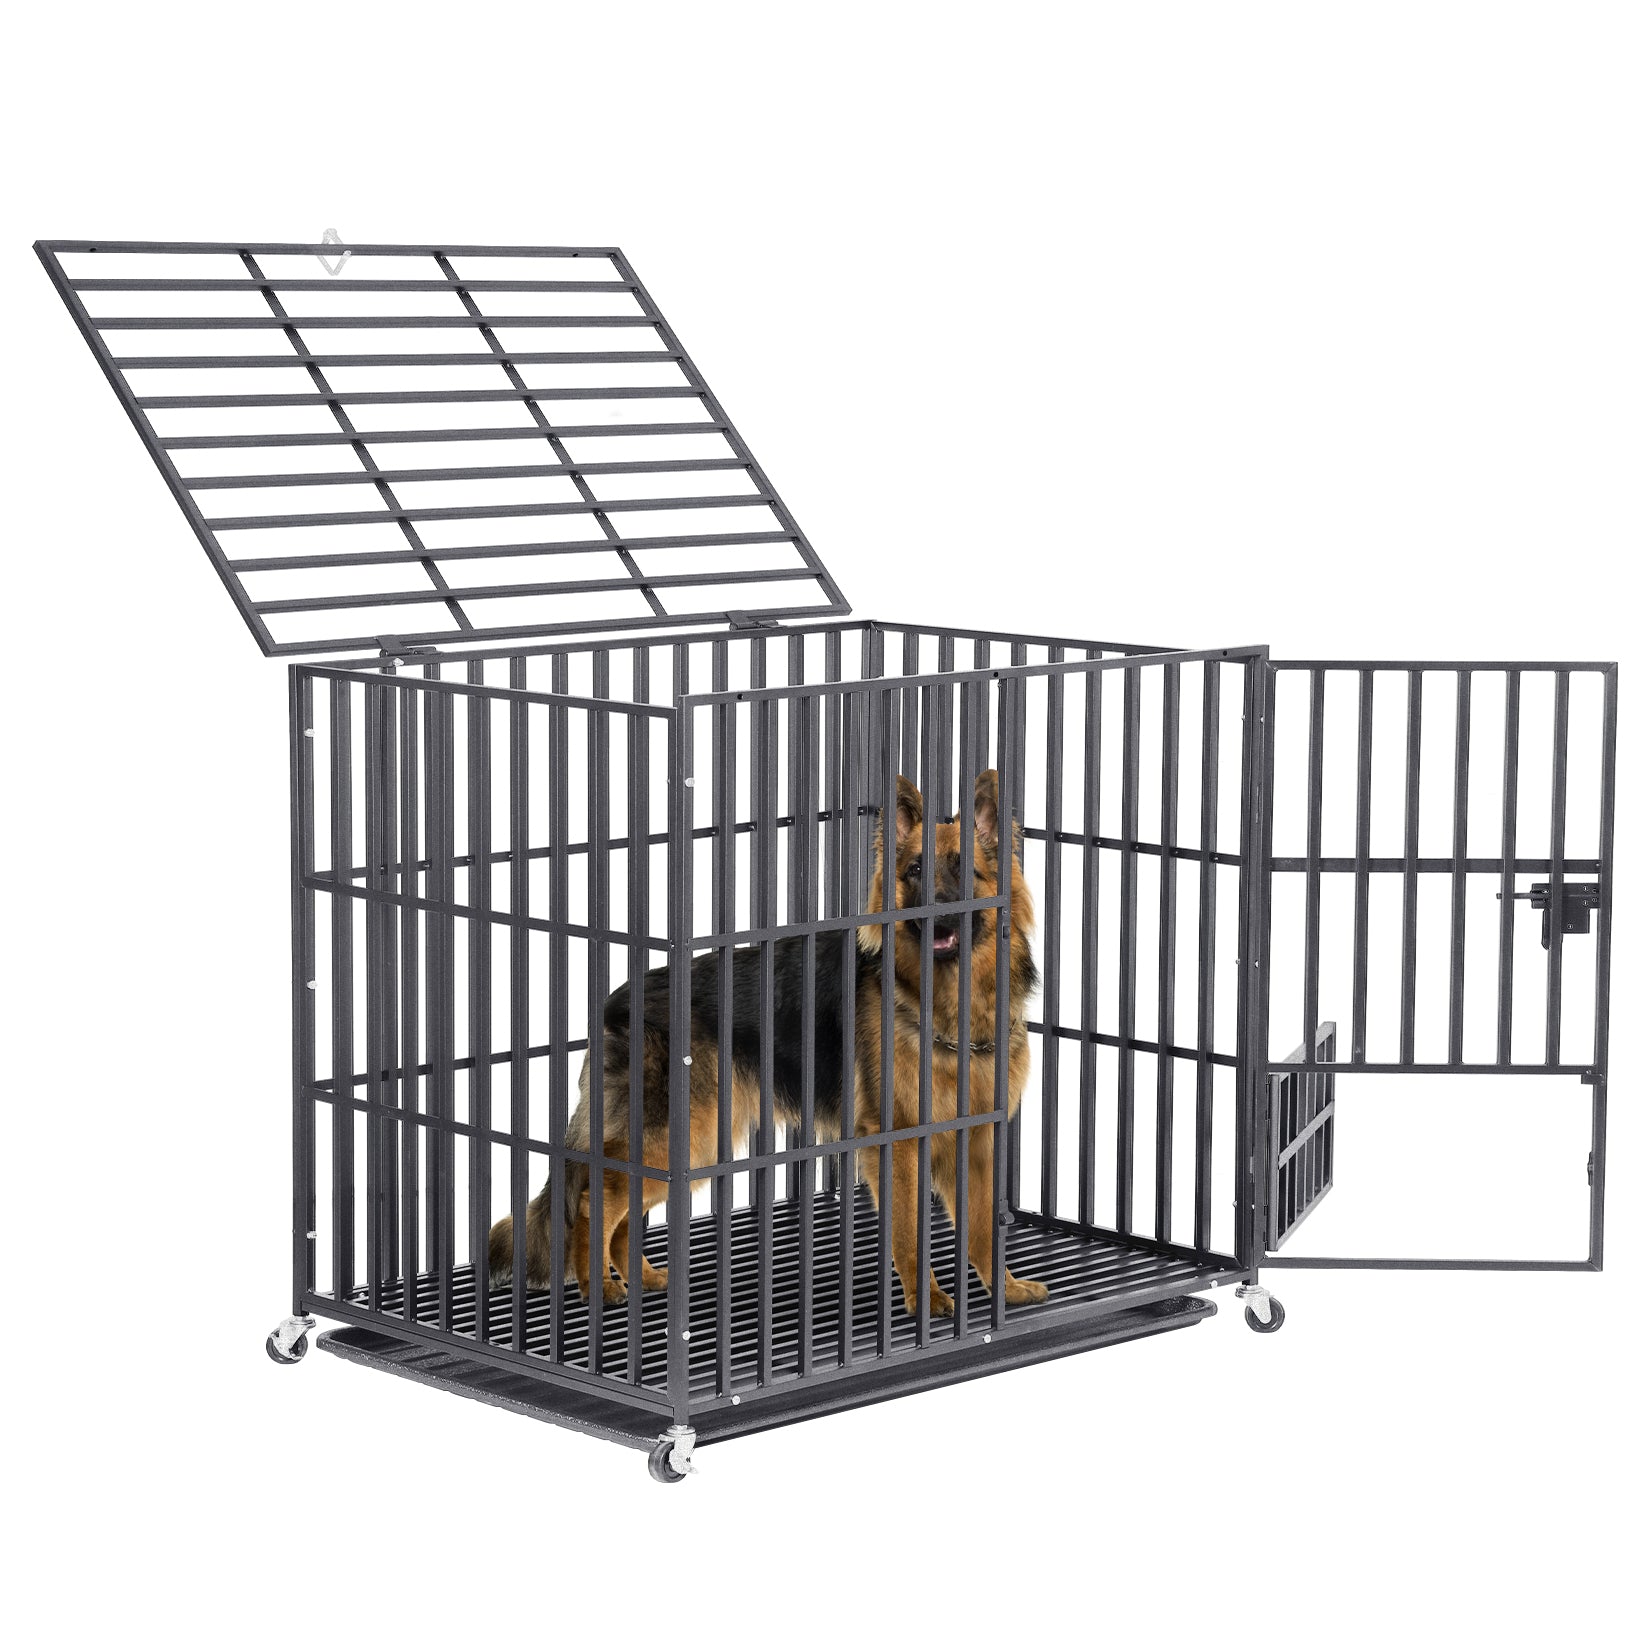 Heavy Duty Dog Cage Dog crate Dog kennel balck strong durable